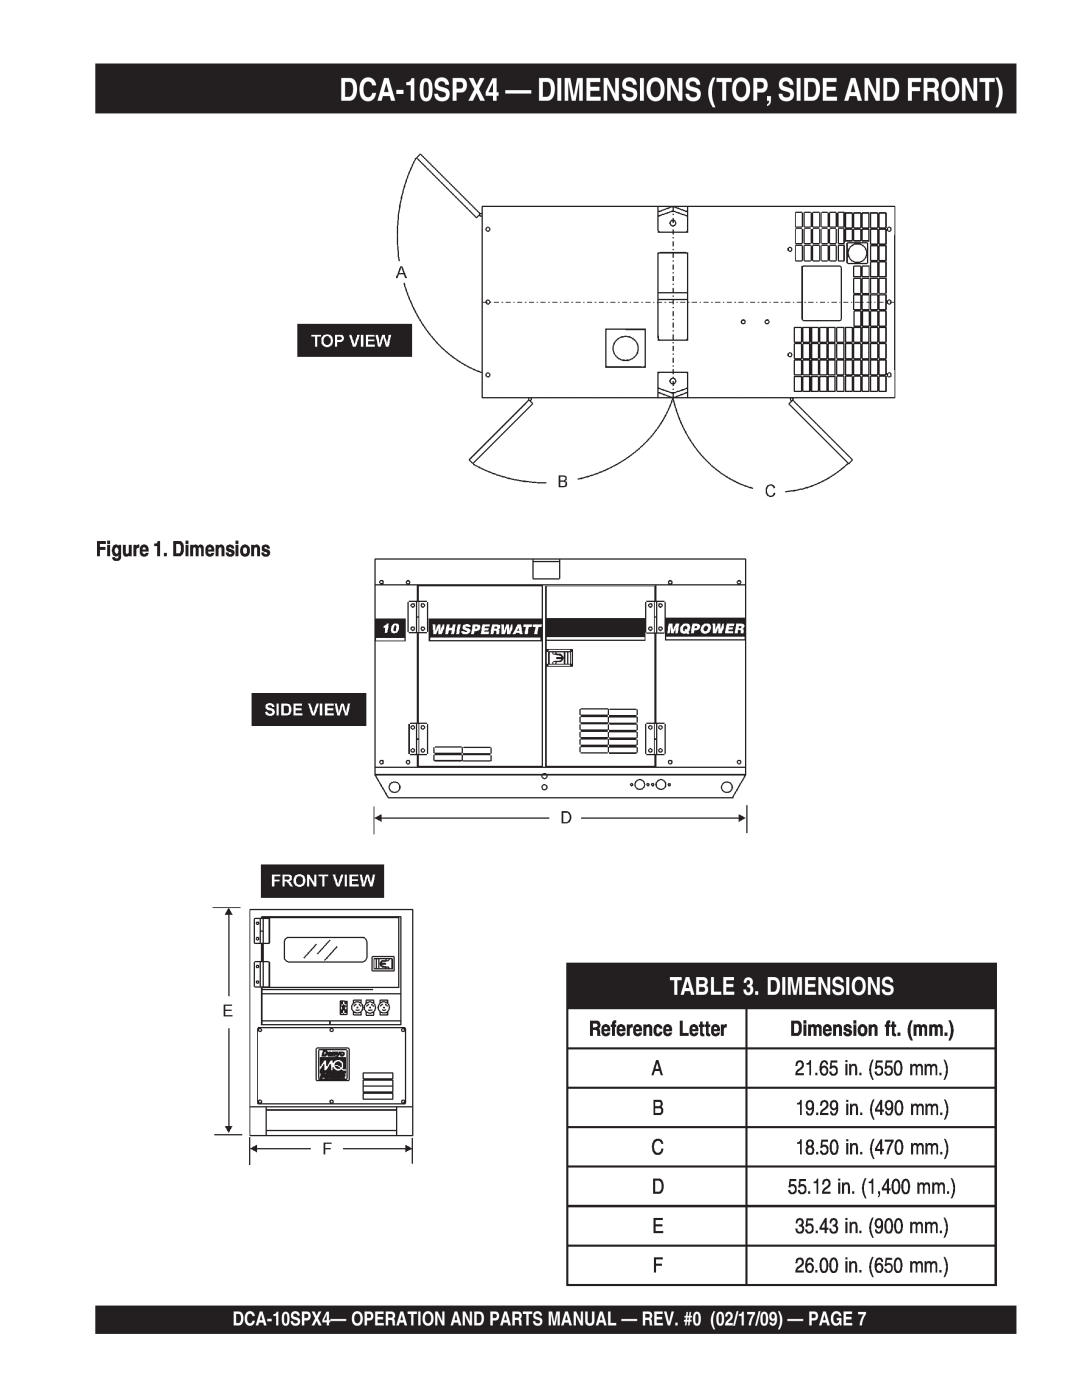 Multiquip operation manual DCA-10SPX4 - DIMENSIONS TOP, SIDE AND FRONT, Dimensions, Dimension ft. mm, Reference Letter 